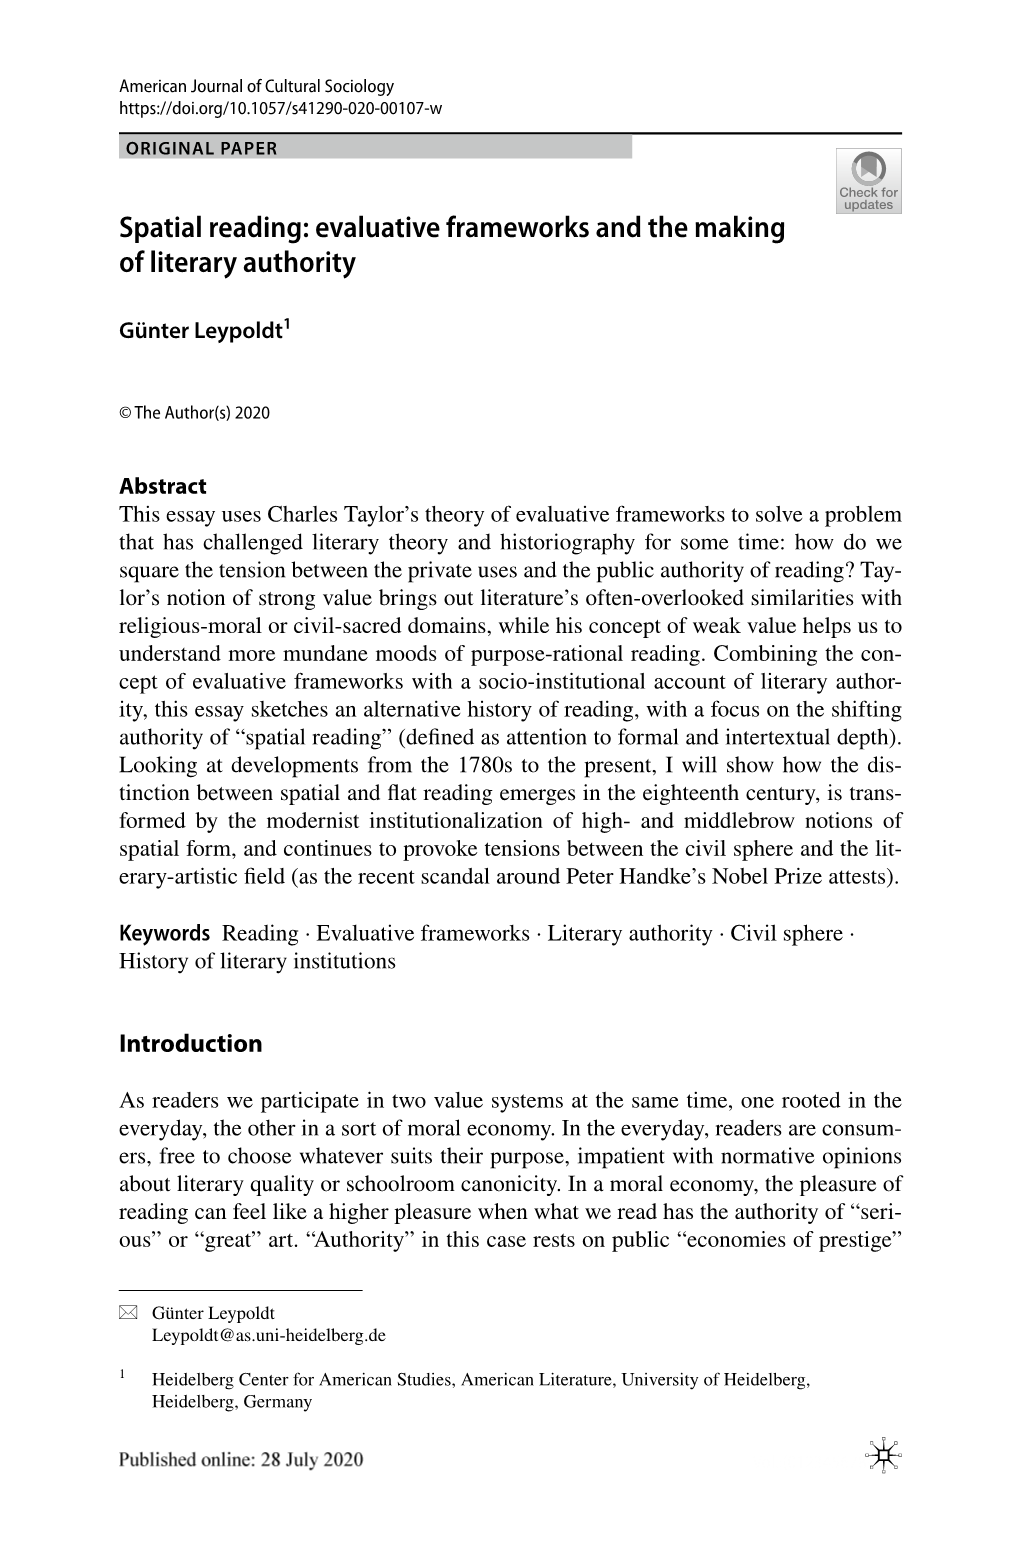 Spatial Reading: Evaluative Frameworks and the Making of Literary Authority